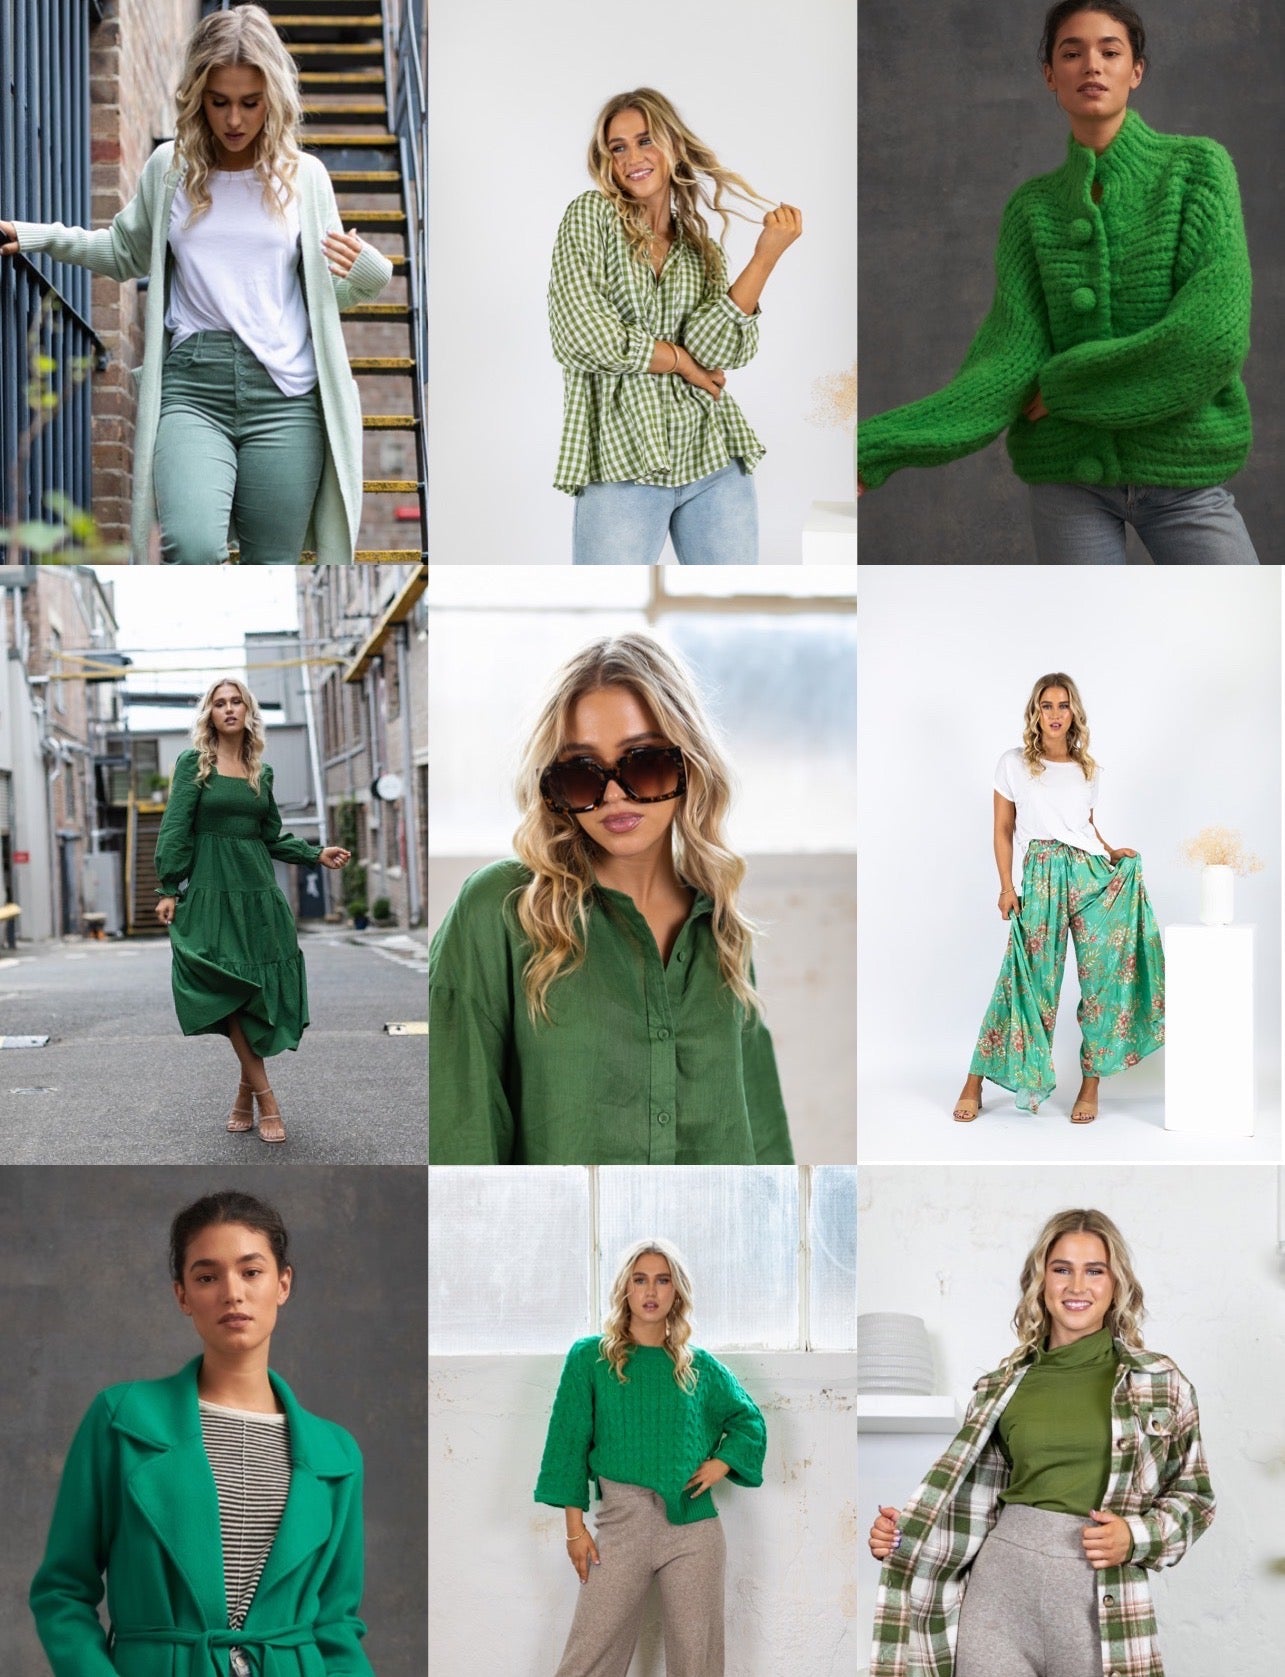 Selection of Green garments available at Jipsi Cartel from brands including Little Lies, Iris Maxi, Silver Wishes, Delilah